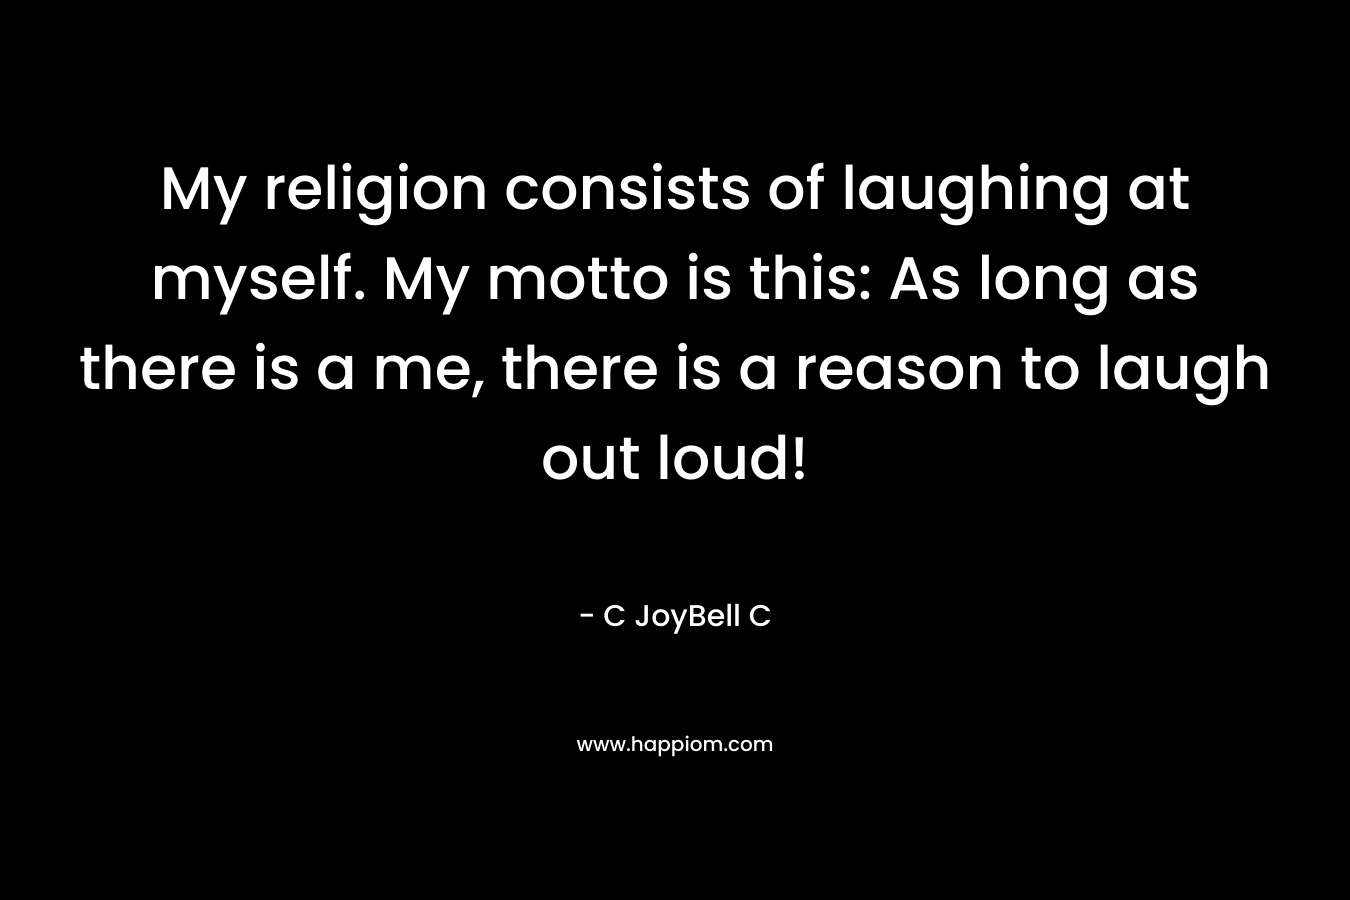 My religion consists of laughing at myself. My motto is this: As long as there is a me, there is a reason to laugh out loud! – C JoyBell C